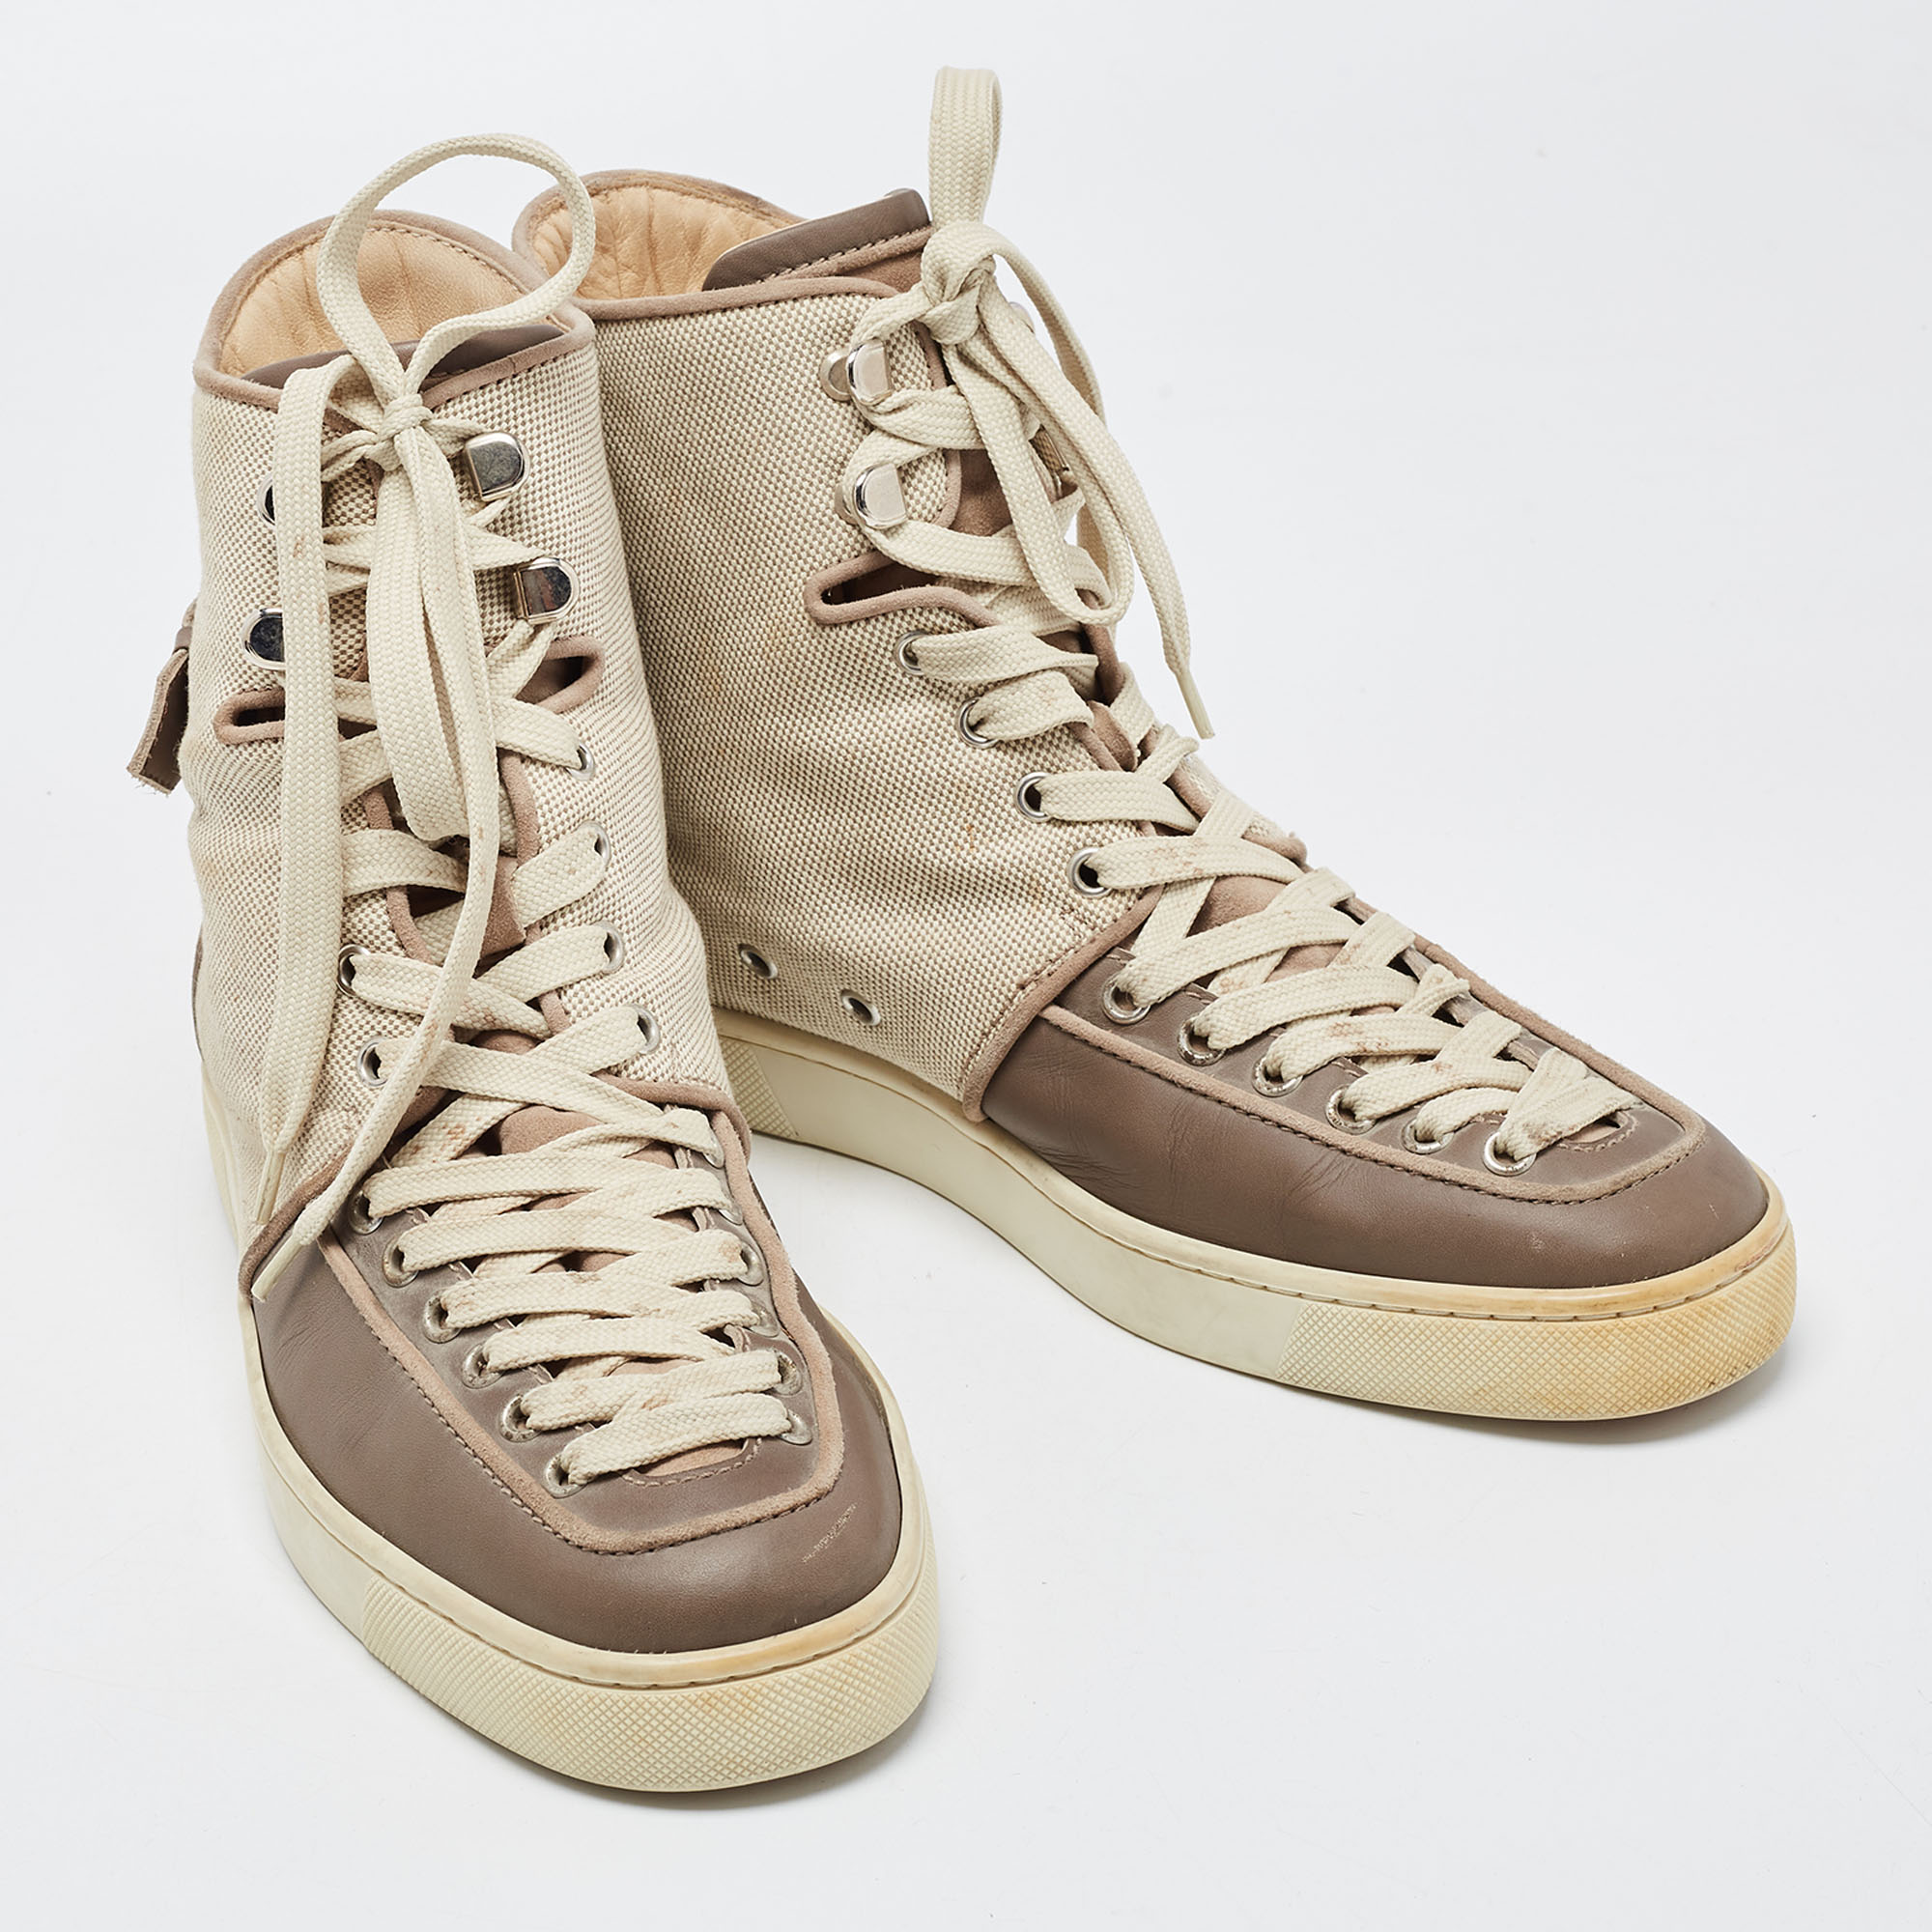 Christian Louboutin Two Tone Canvas And Leather Alfie High Top Sneakers Size 41